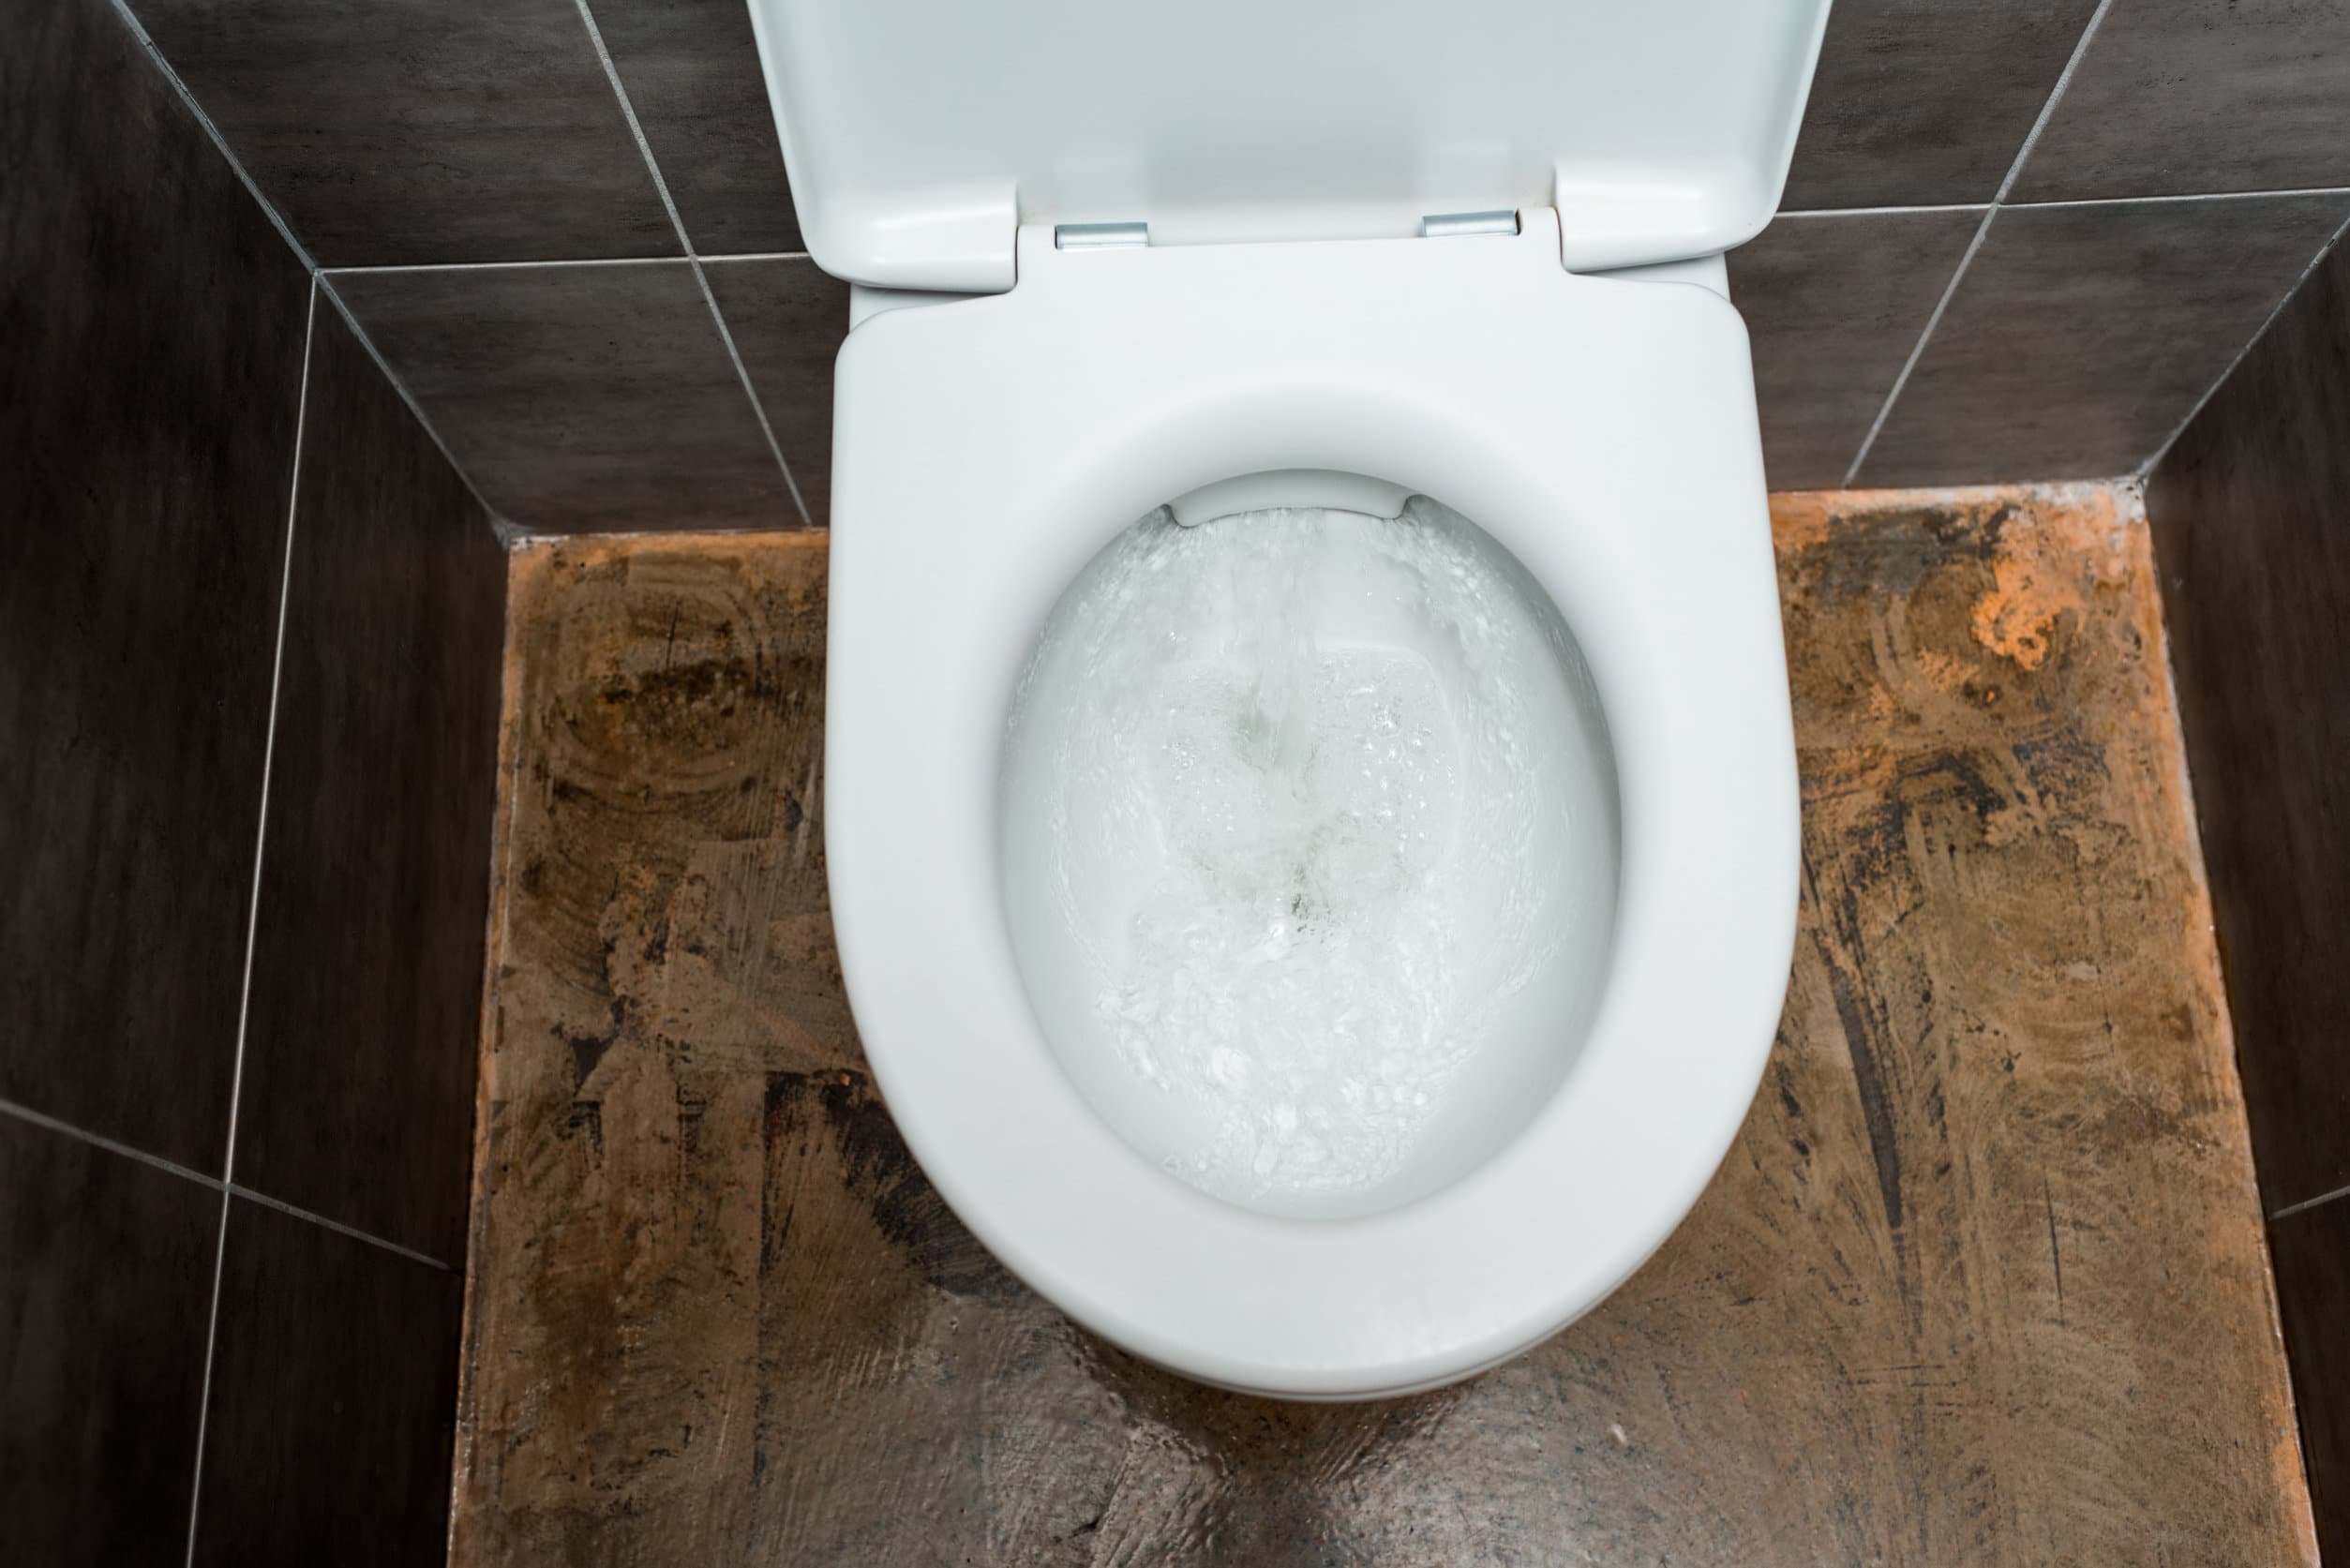 Why Does My Toilet Keep Running?